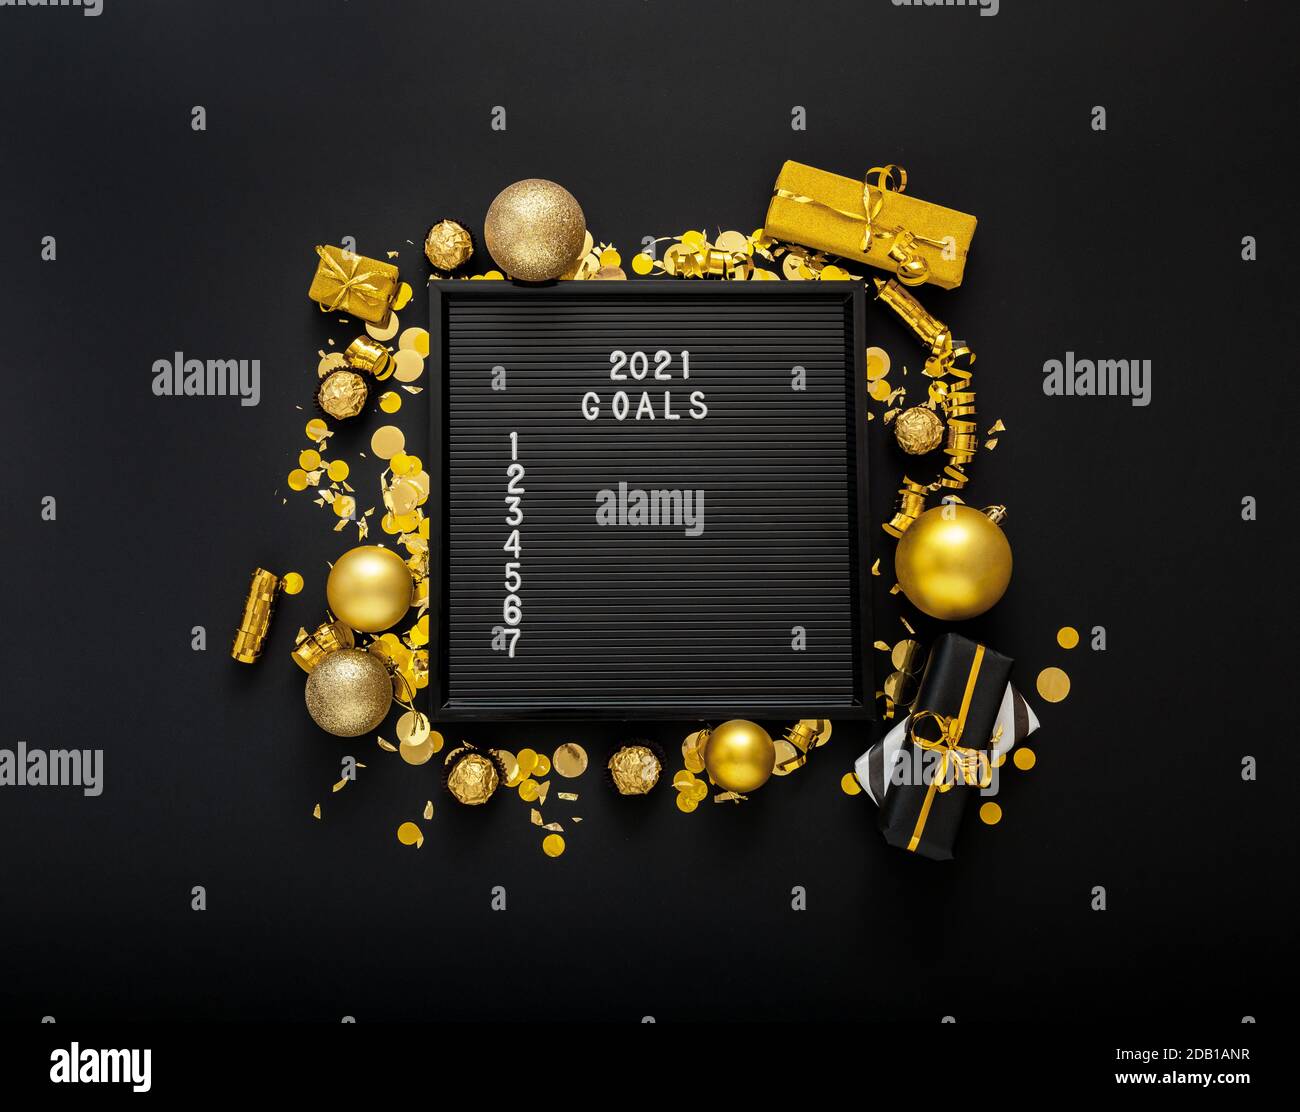 Numbered list of 2021 Goals on black Board in frame made of gold festive decor, gift boxes, confetti. New year eve 2021 goals, resolution check list w Stock Photo